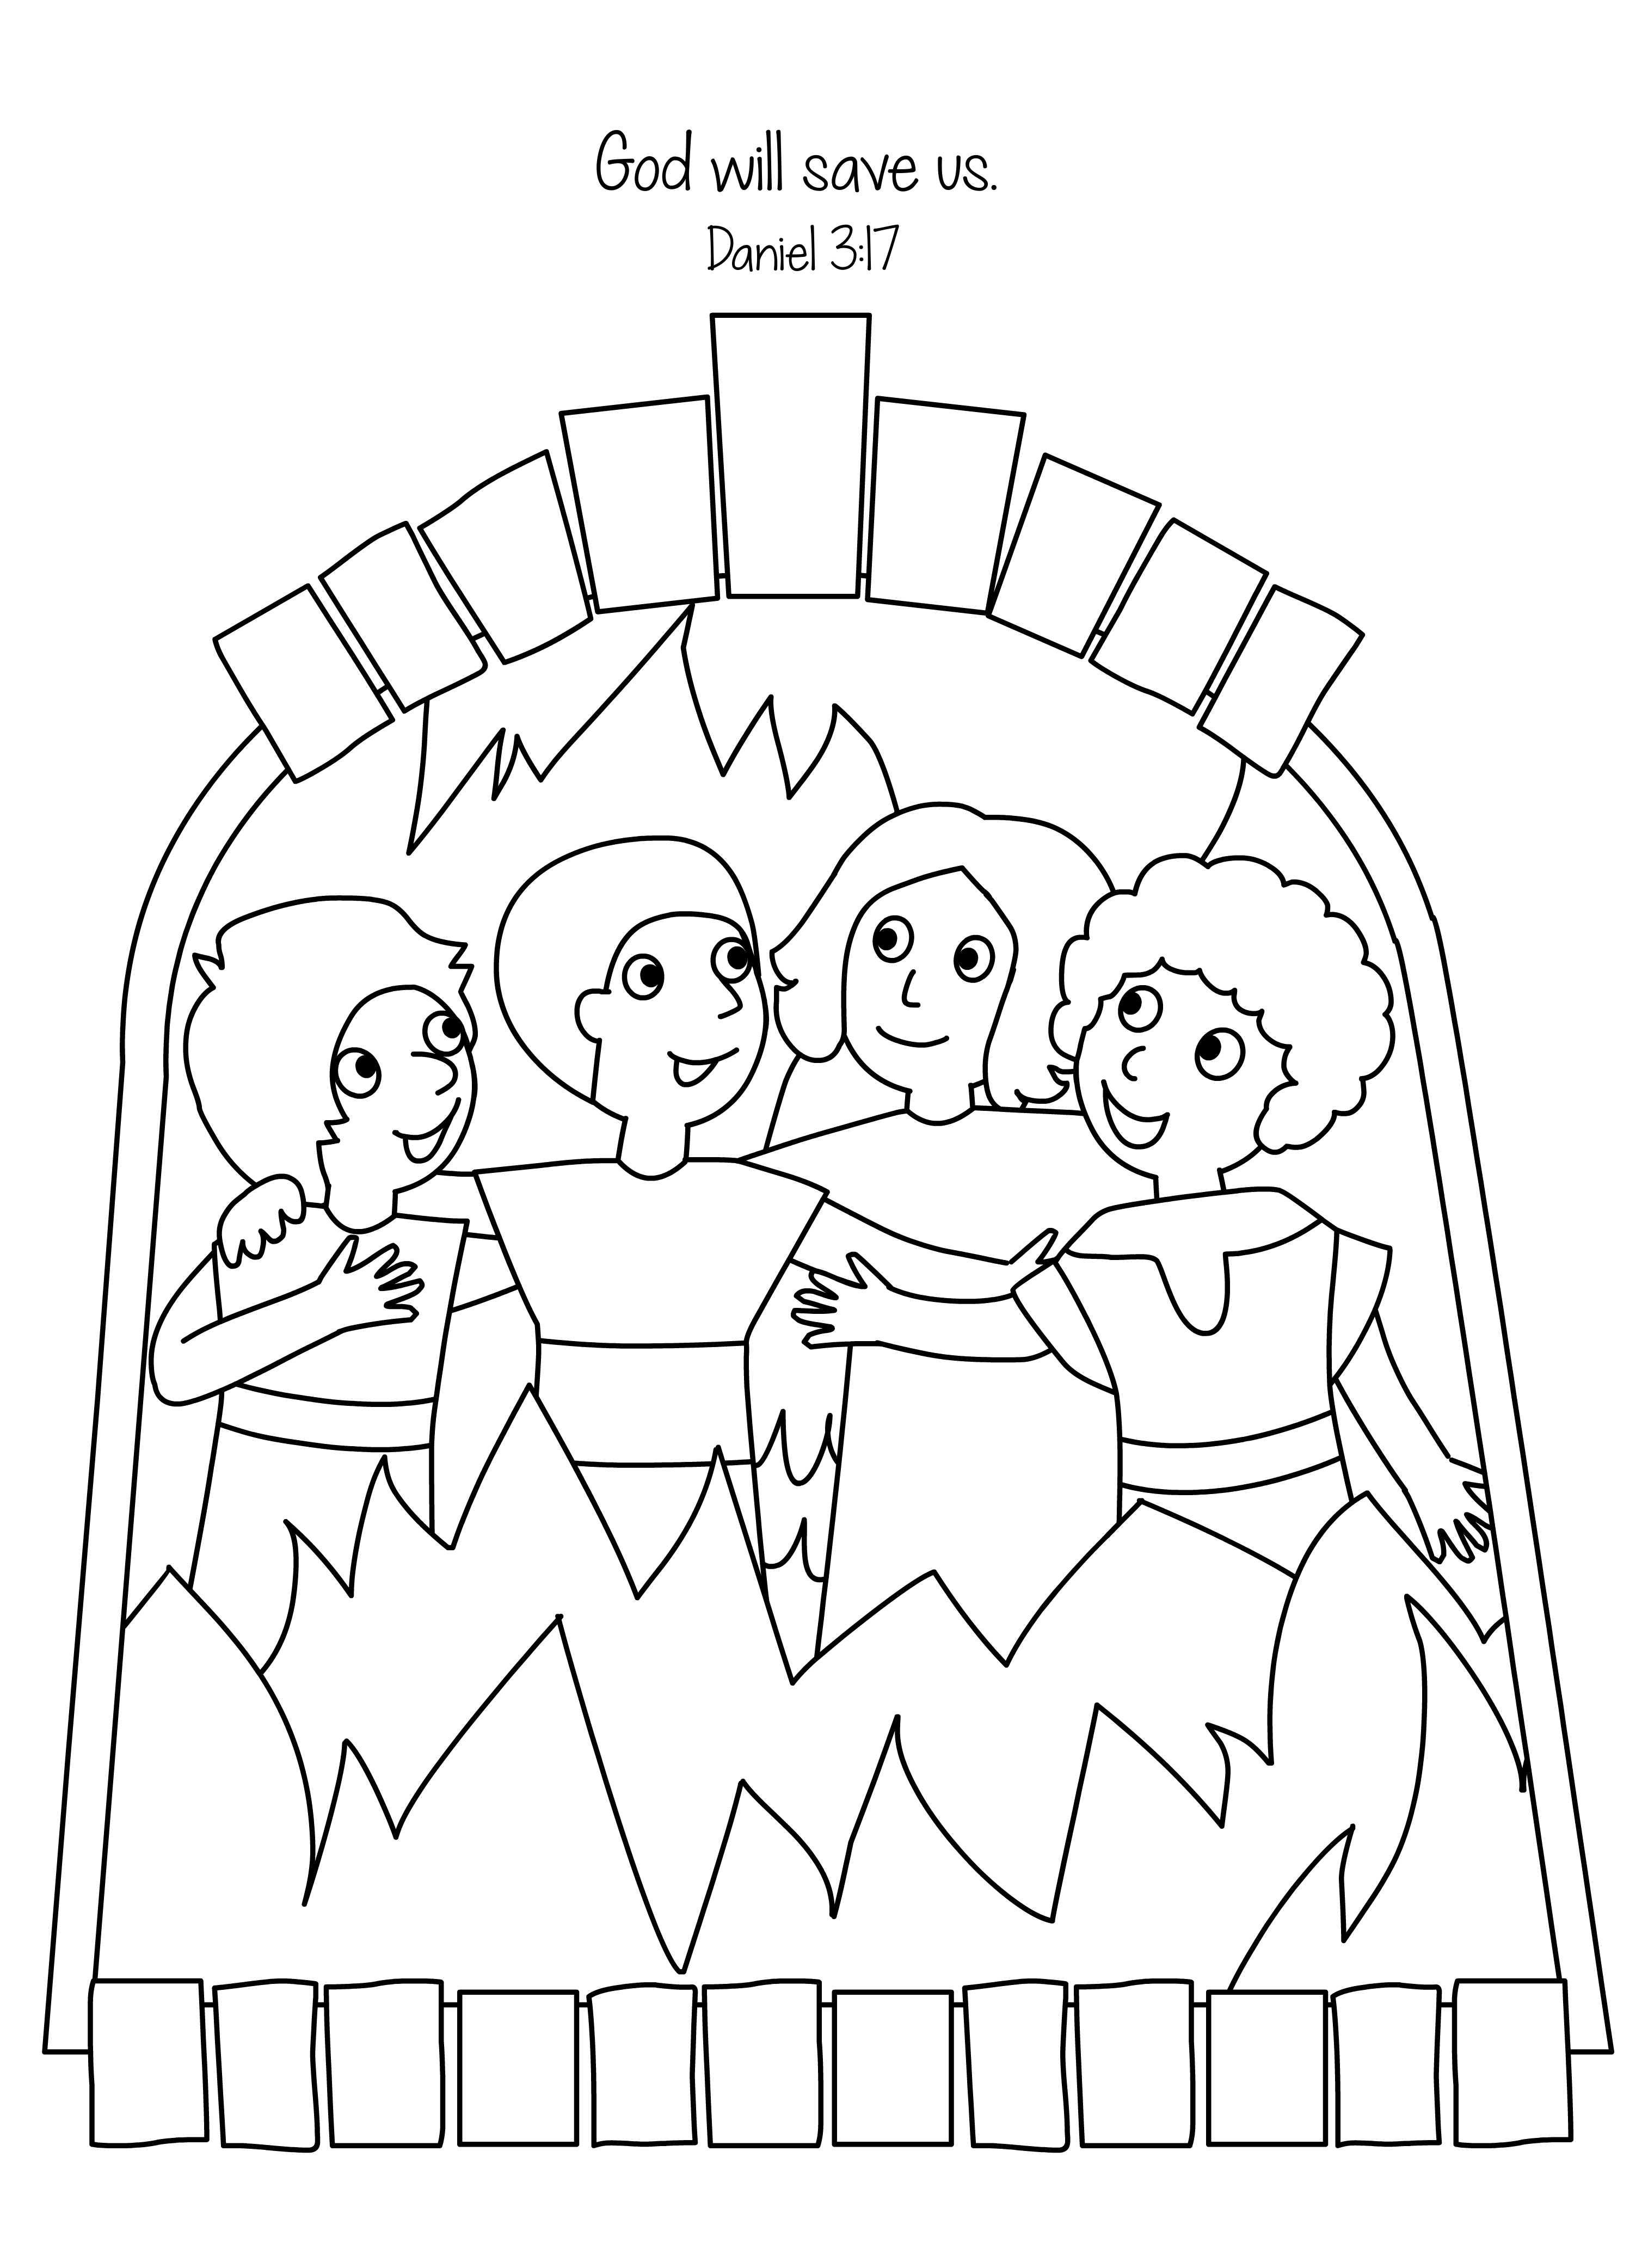 Amazing Fiery Furnace Coloring Page - Shadrach Meshach And Abednego In The Bible